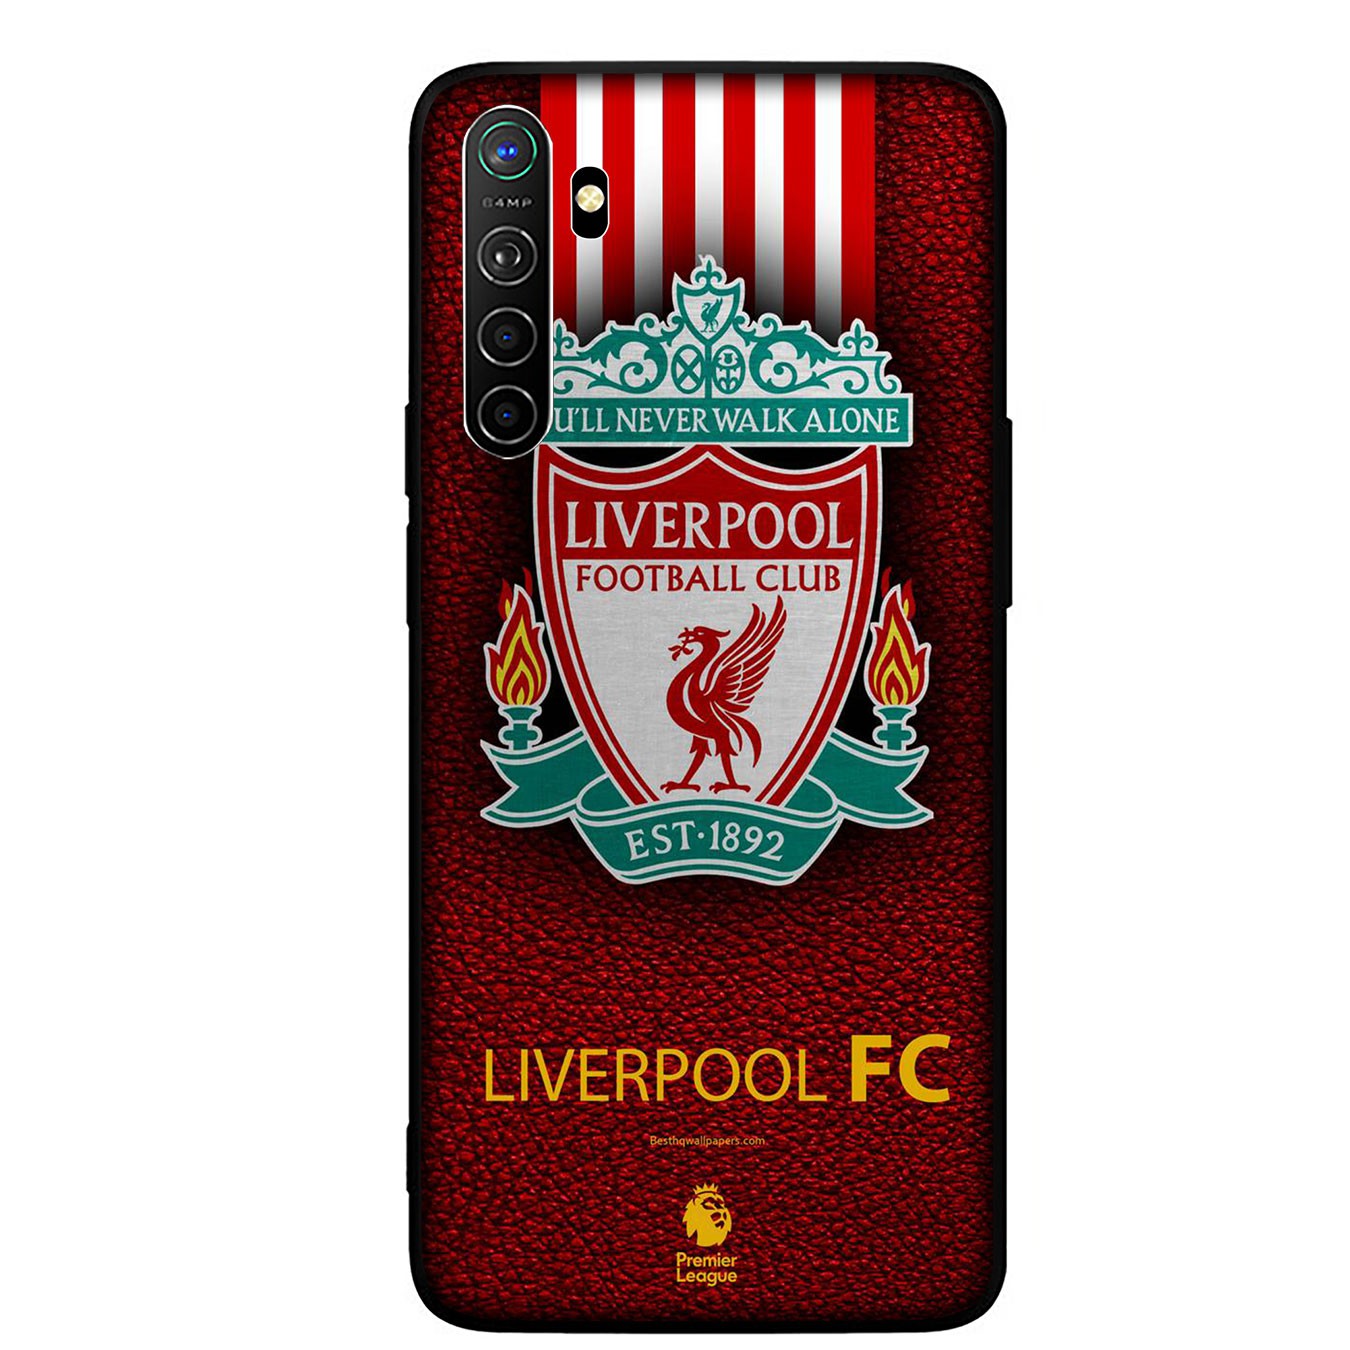 Samsung Galaxy S21 Ultra S8 Plus F62 M62 A2 A32 A52 A72 S21+ S8+ S21Plus Casing Soft Silicone Liverpool red Logo Phone Case